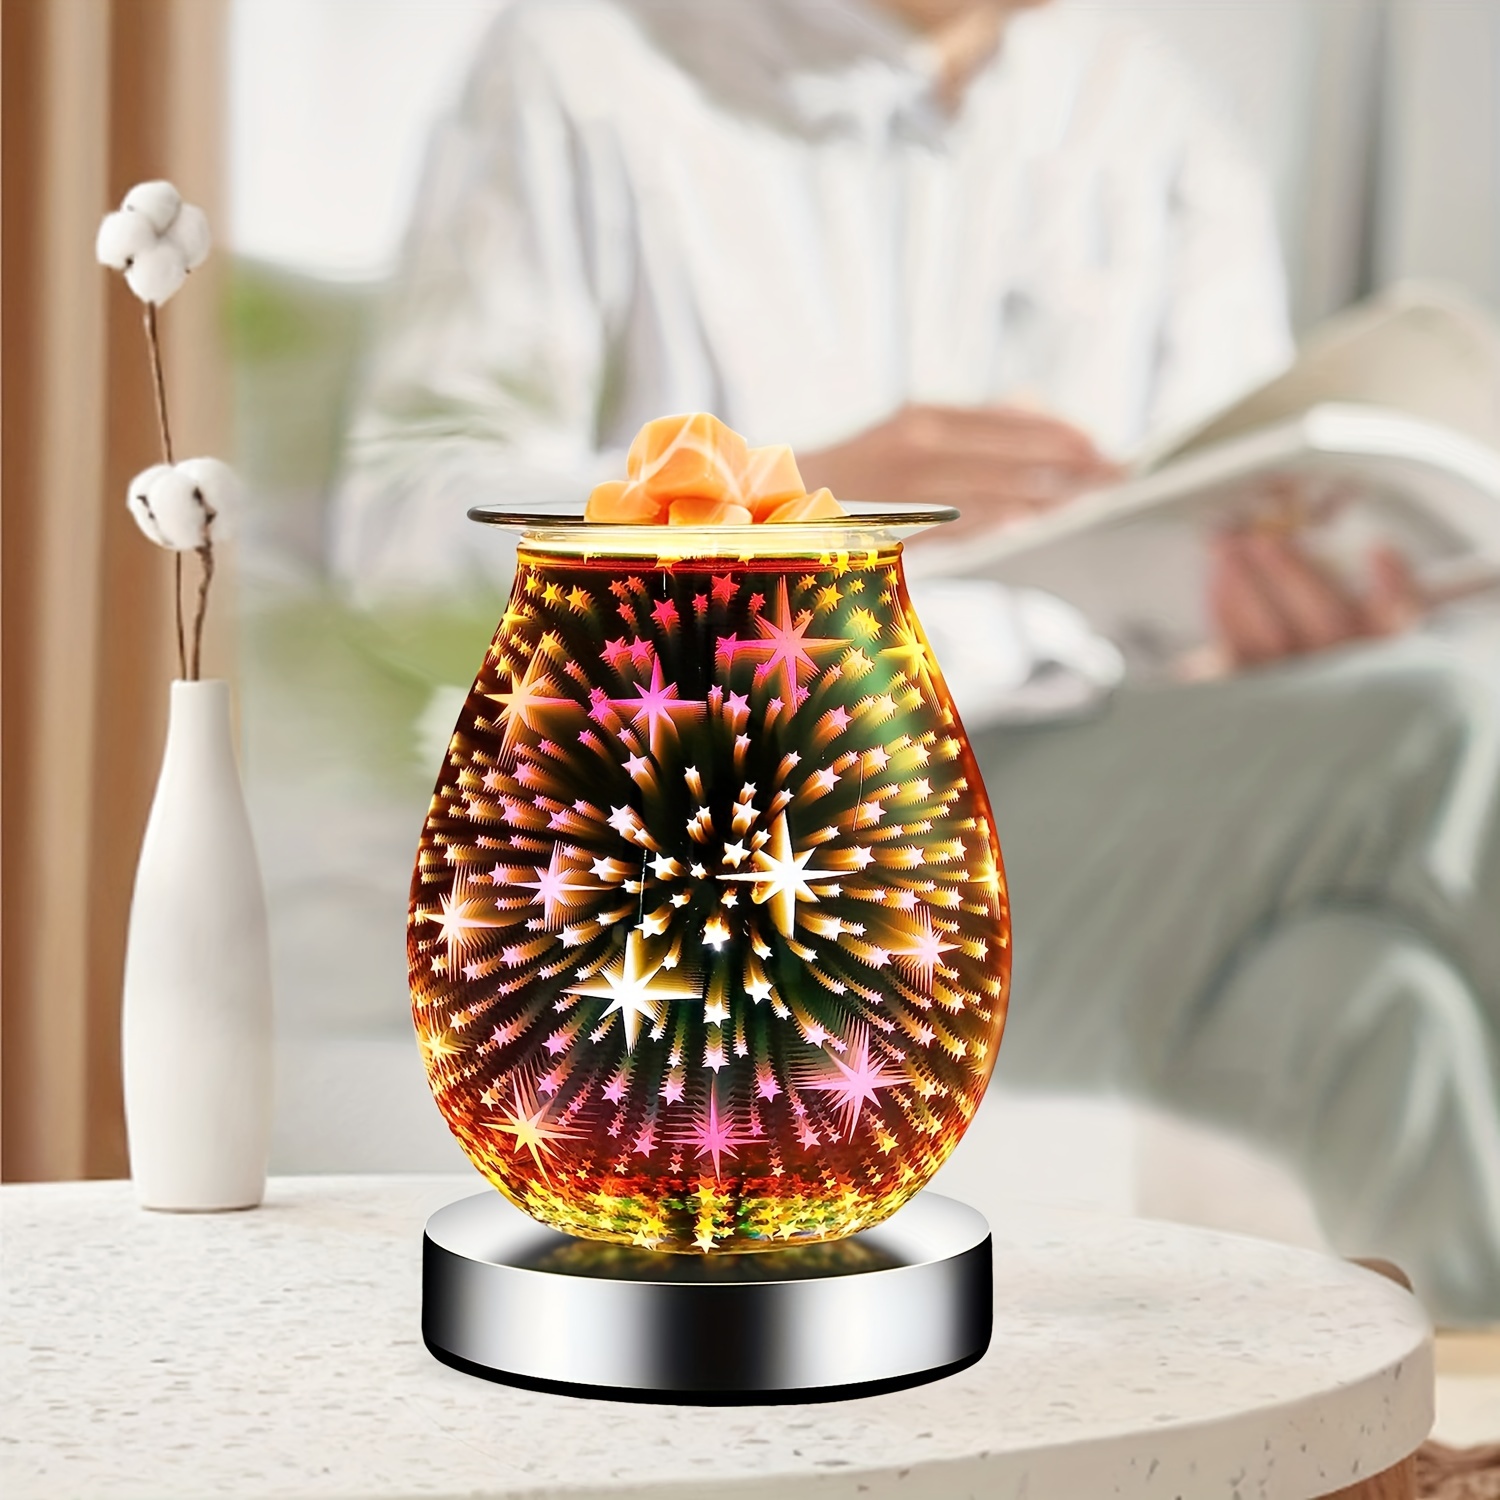 Wax Warmer for Scented Wax Melters,Glass Wax Melt Warmers Electric,Scented Wax Burner with Night Light,Wax Melter Warmer for Christmas Gifts&Office